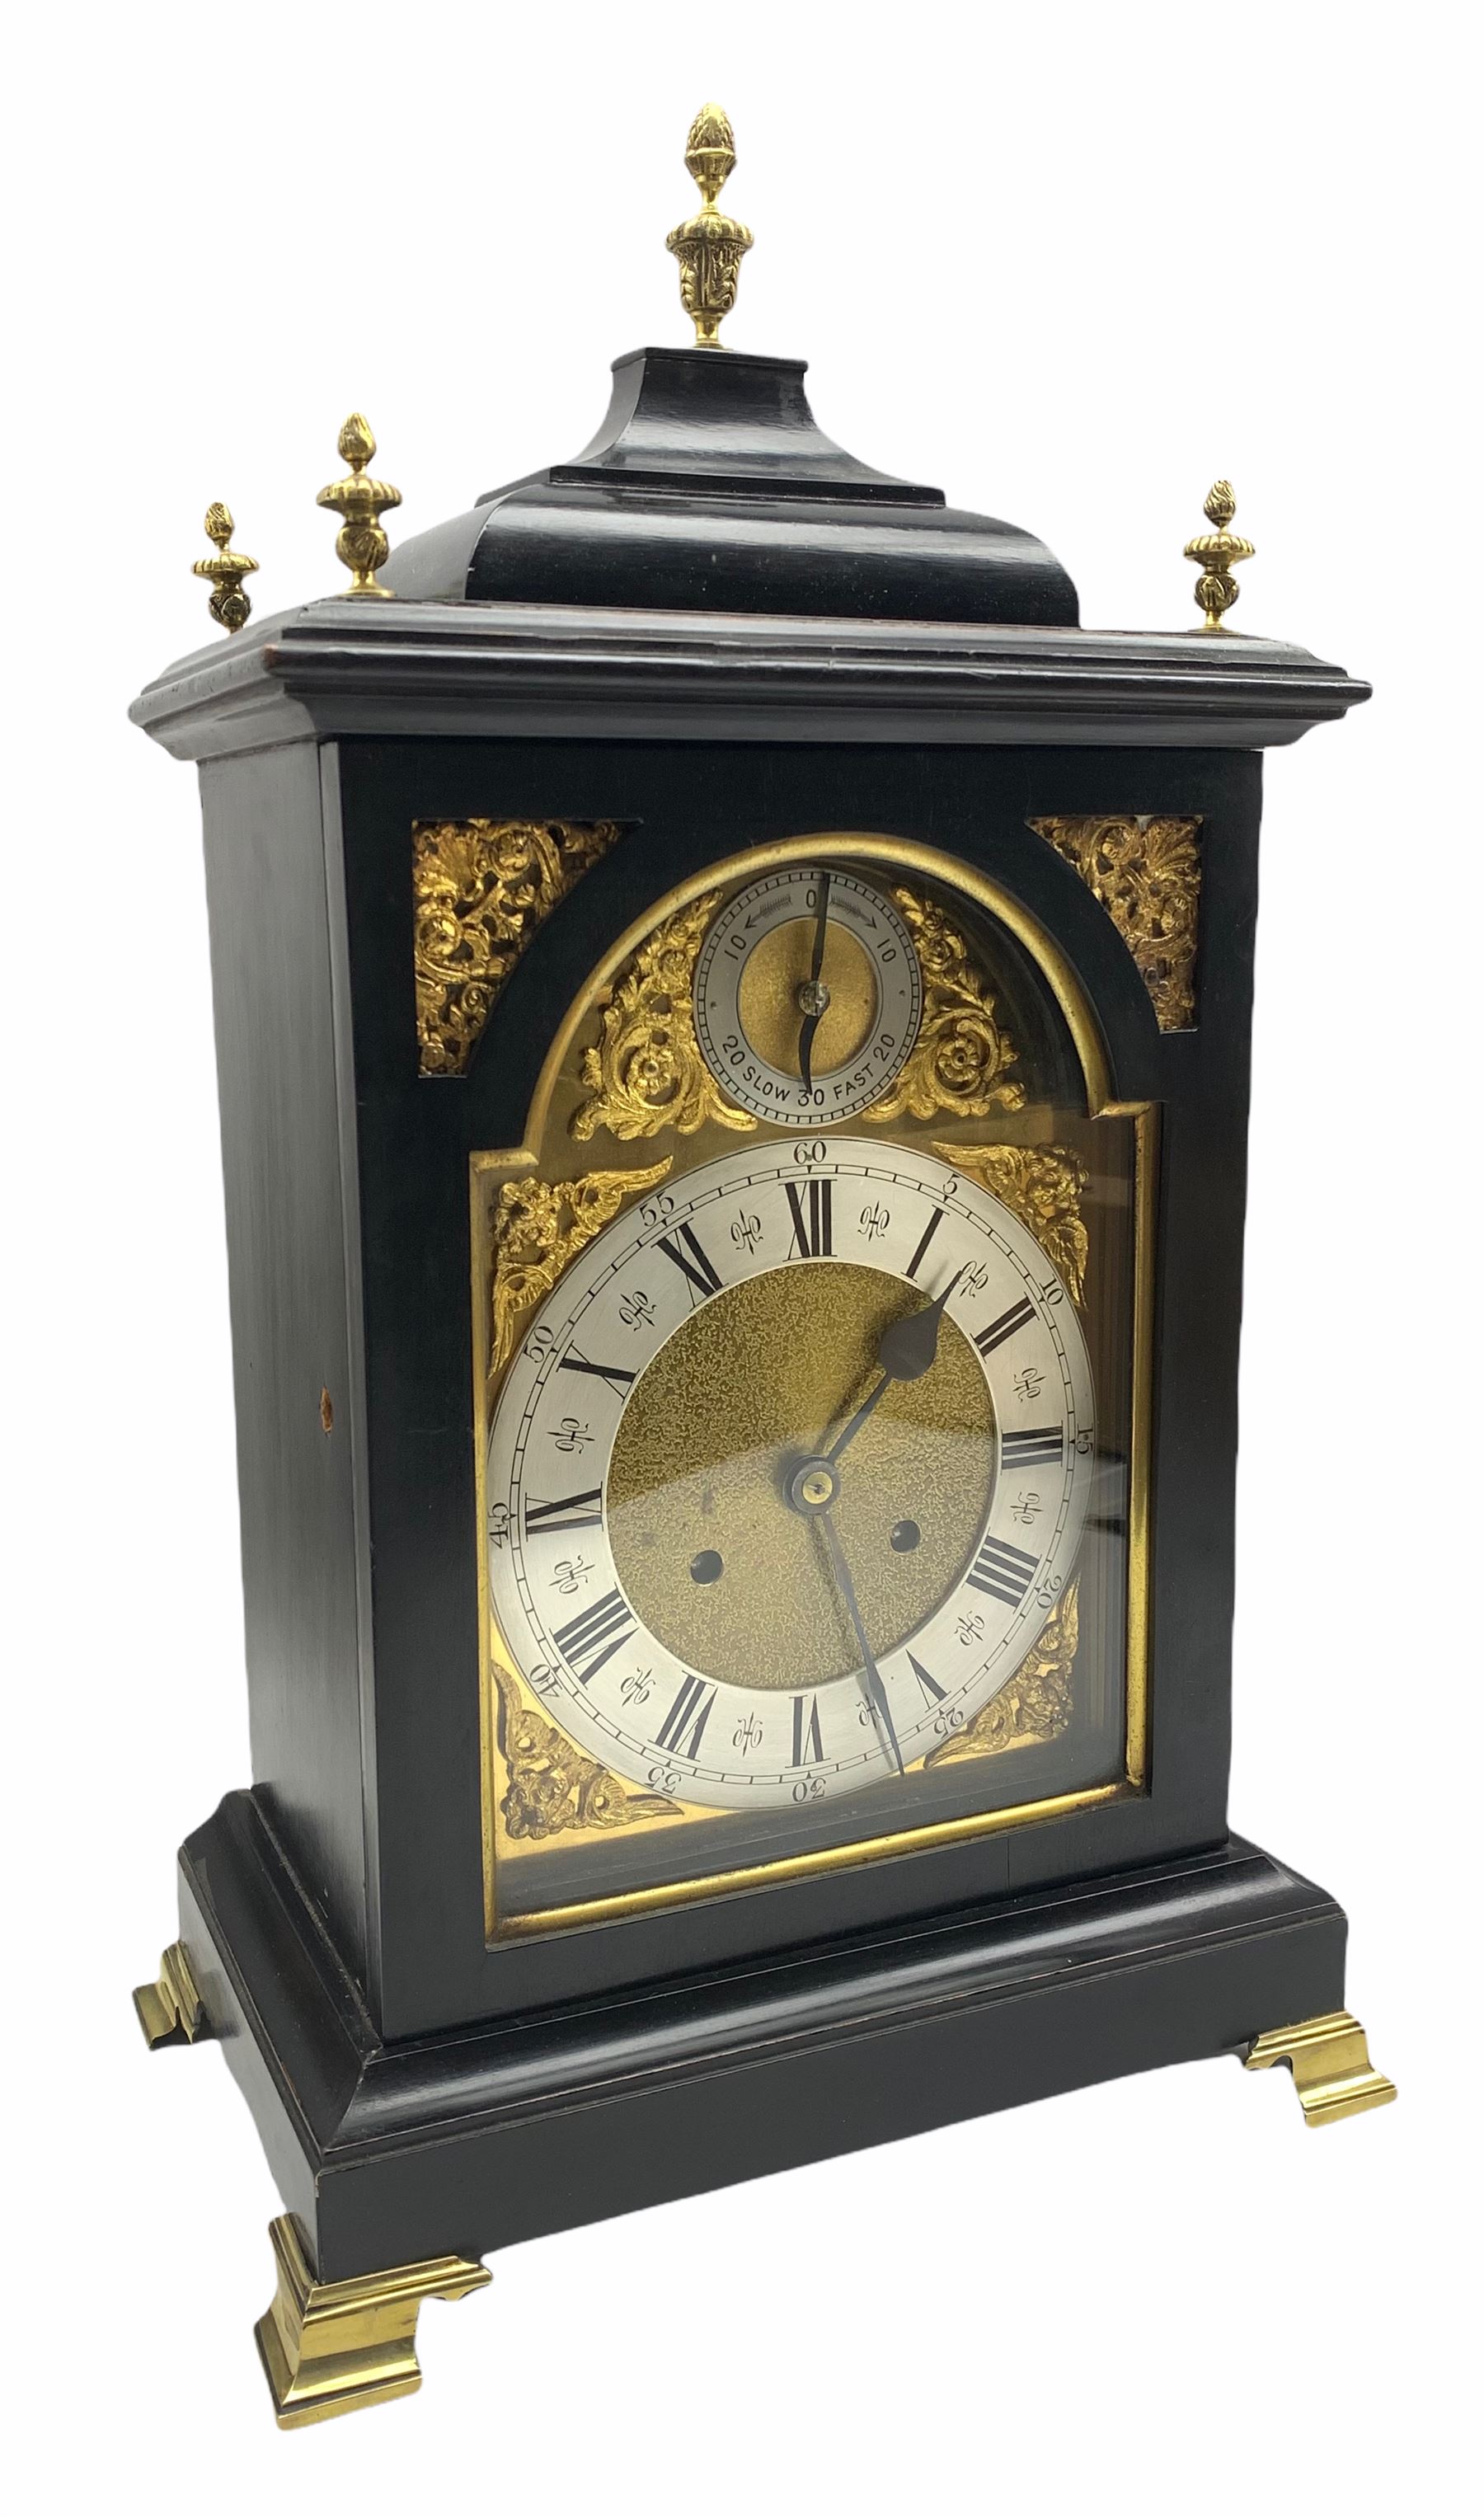 Early 20th century eight-day ebonised German bracket clock with a two train striking movement